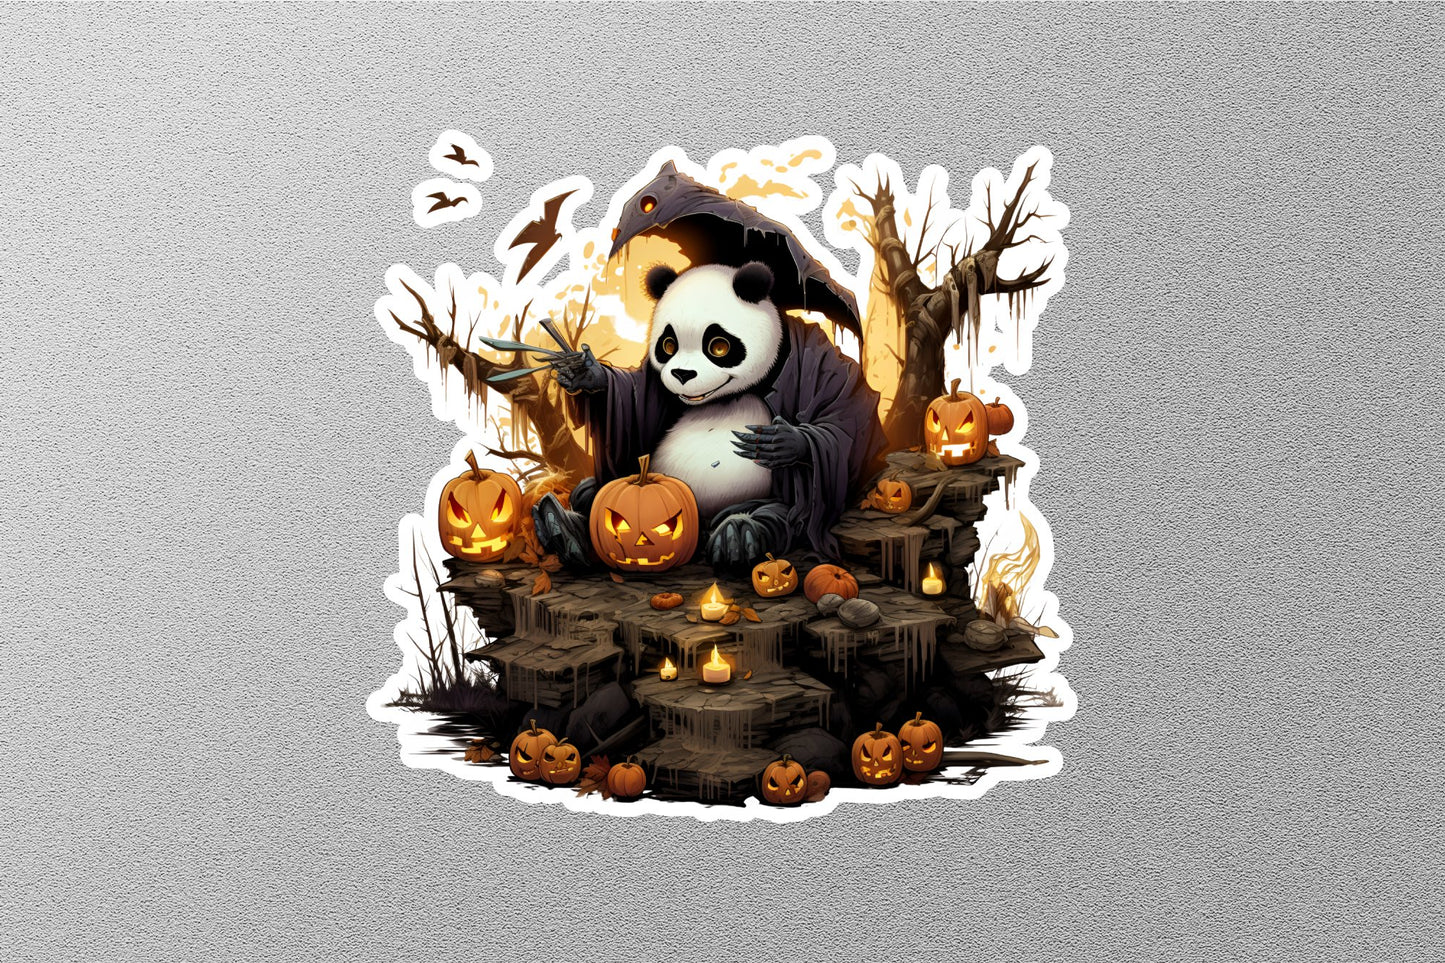 Scary Panda With Angry Pumpkins Halloween Sticker